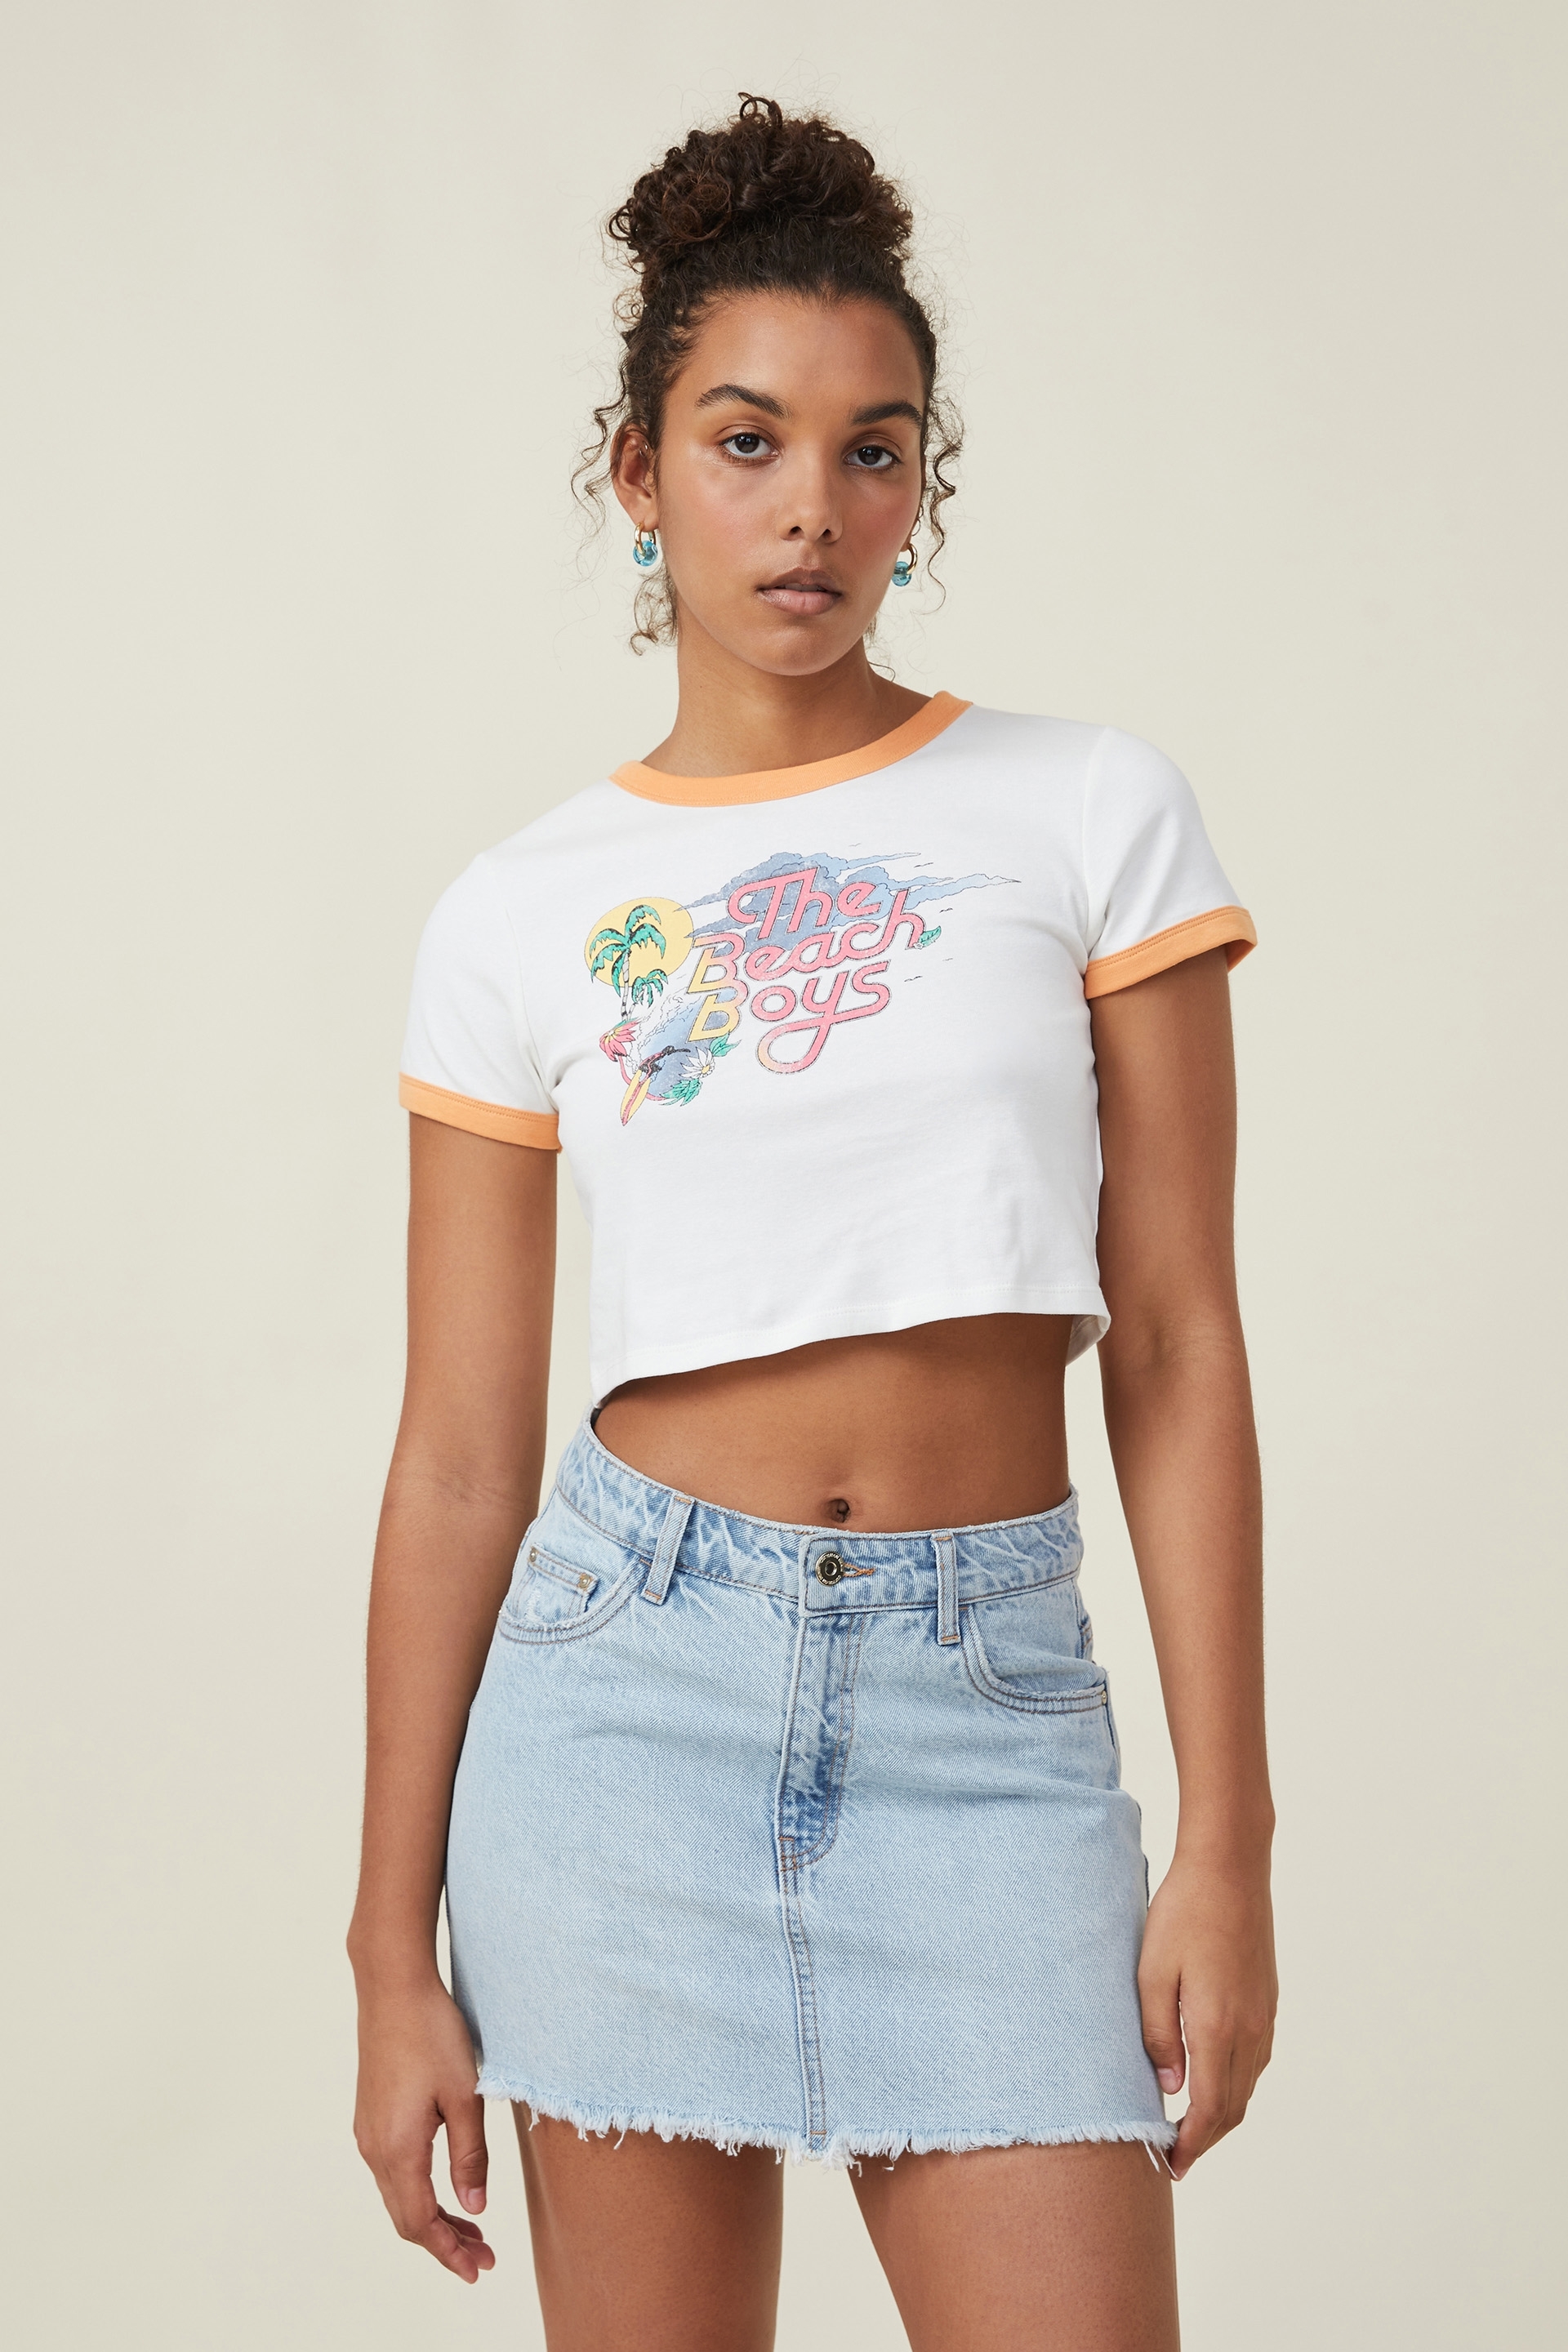 Cotton On Women - Micro Fit Rib Graphic License Tee - Lcn br the beach boys/vintage white